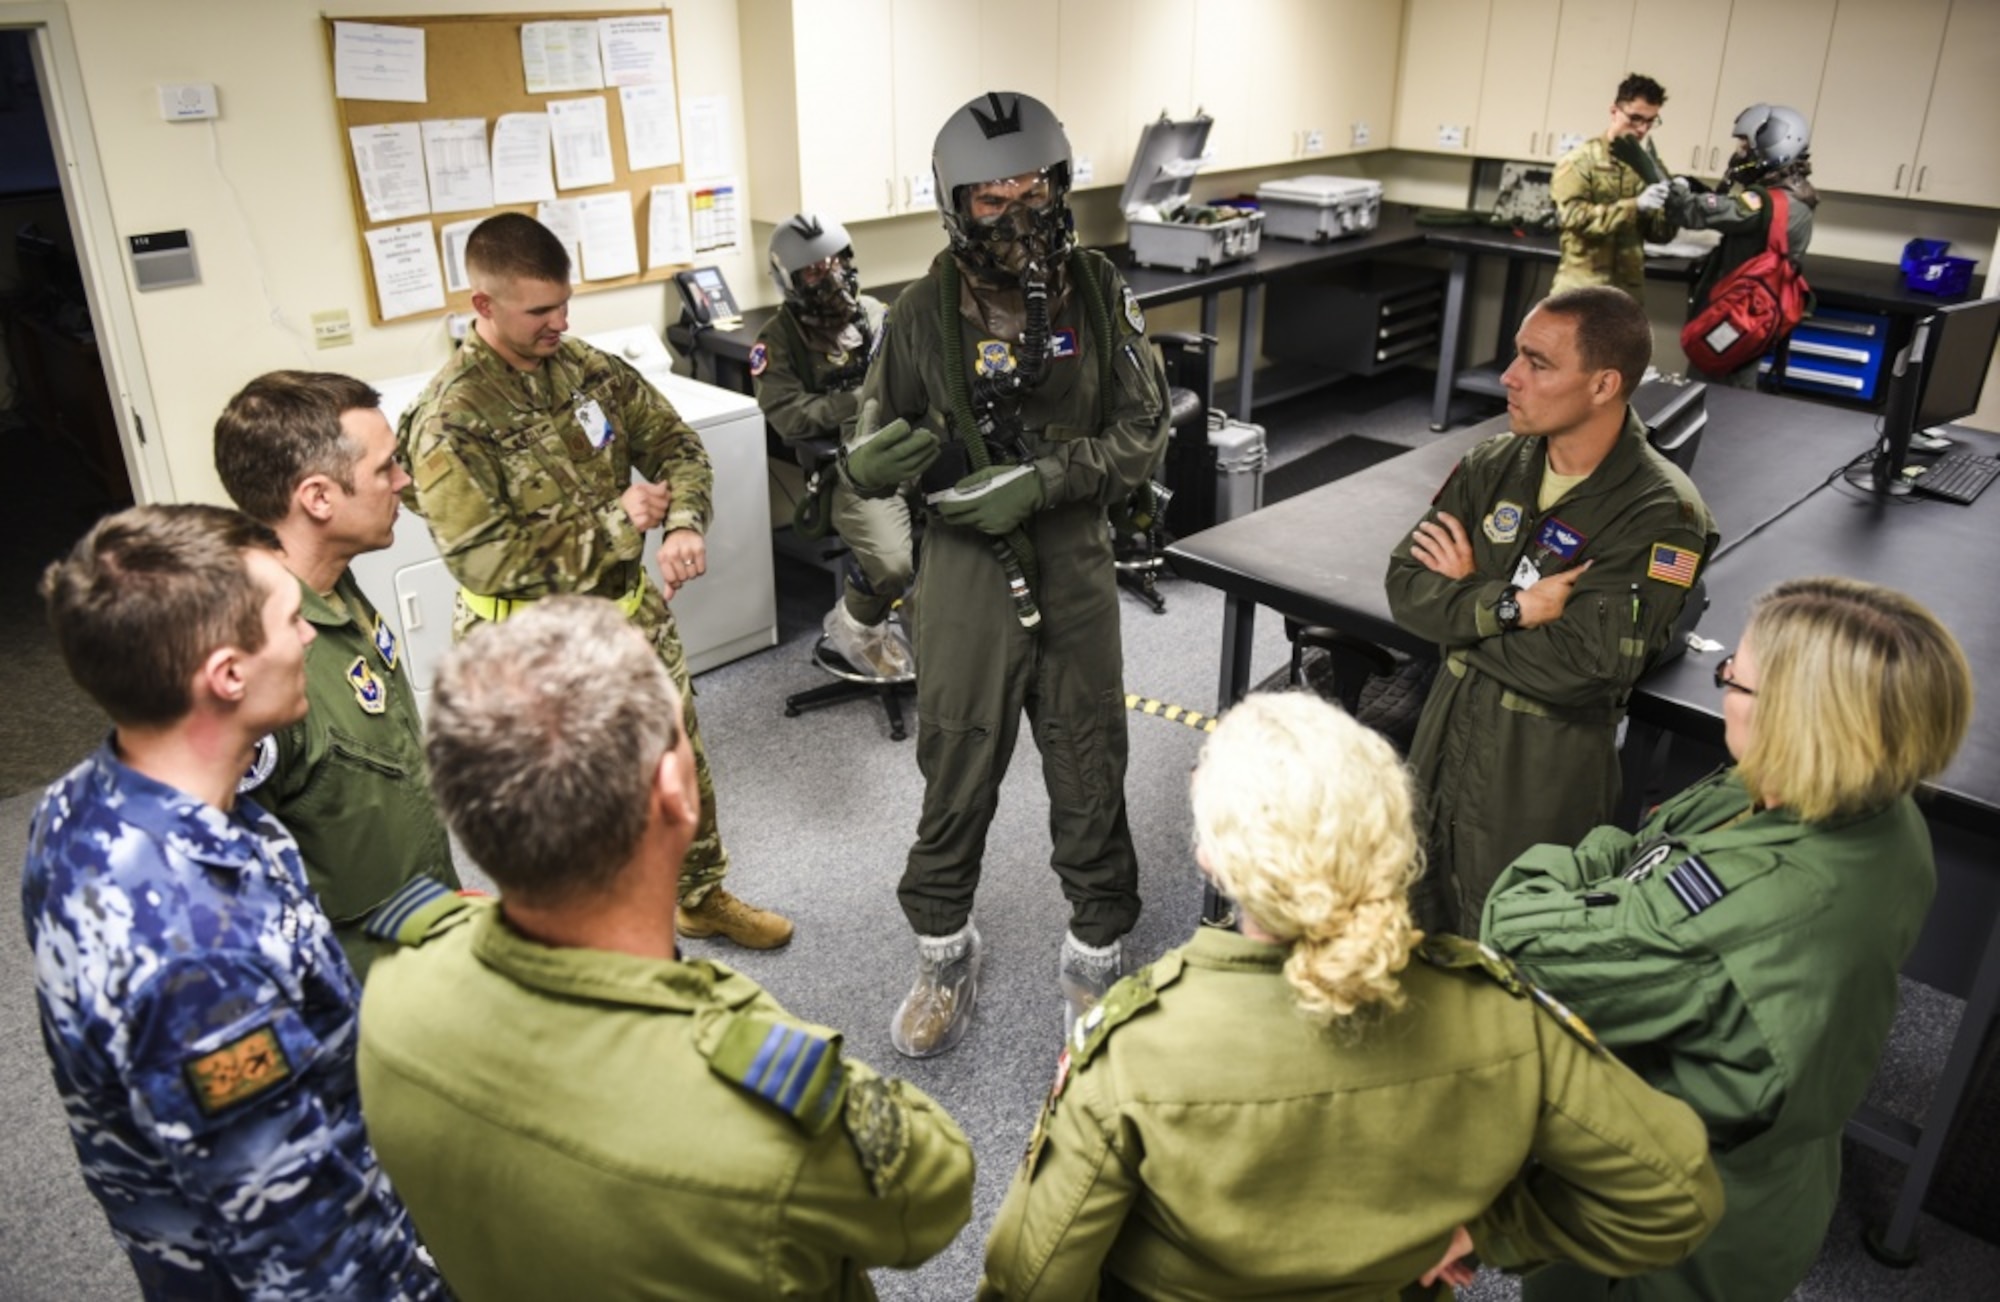 U.S. Air Force Lt. Col Kevin Parsons, center, 93rd Air Refueling Squadron commander assigned to Fairchild Air Force Base, Washington, briefs international partners before a flight Sept. 16, 2019, at Fairchild AFB during Exercise Mobility Guardian 2019. Exercise Mobility Guardian is Air Mobility Command's premier, large scale mobility exercise. Through robust and relevant training, Mobility Guardian improves the readiness and capabilities of Mobility Airmen to deliver rapid global mobility and builds a more lethal and ready Air Force. (U.S. Air Force photo by Staff Sgt. Dustin Mullen)